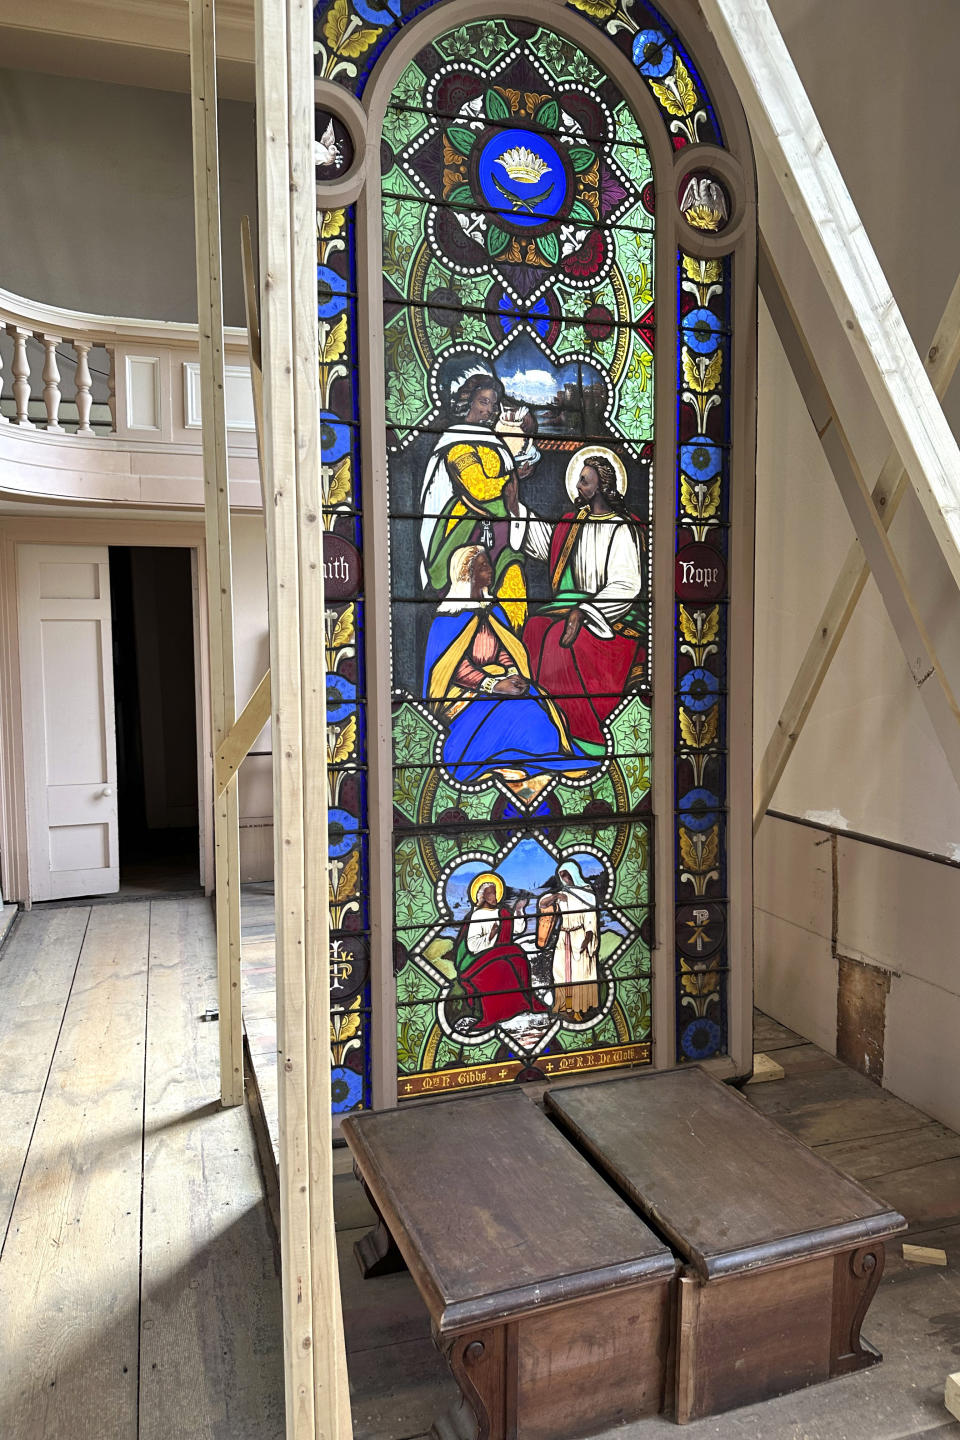 A nearly 150-year-old stained-glass window is displayed Monday, May 1, 2023 inside the now-closed St. Mark's Episcopal church, in Warren, R.I. The nearly 150-year-old stained-glass window from the Rhode Island church that depicts Christ and three New Testament women with dark skin has stirred up questions about race and the place of women in both biblical and 19th century society. (AP Photo/Mark Pratt)